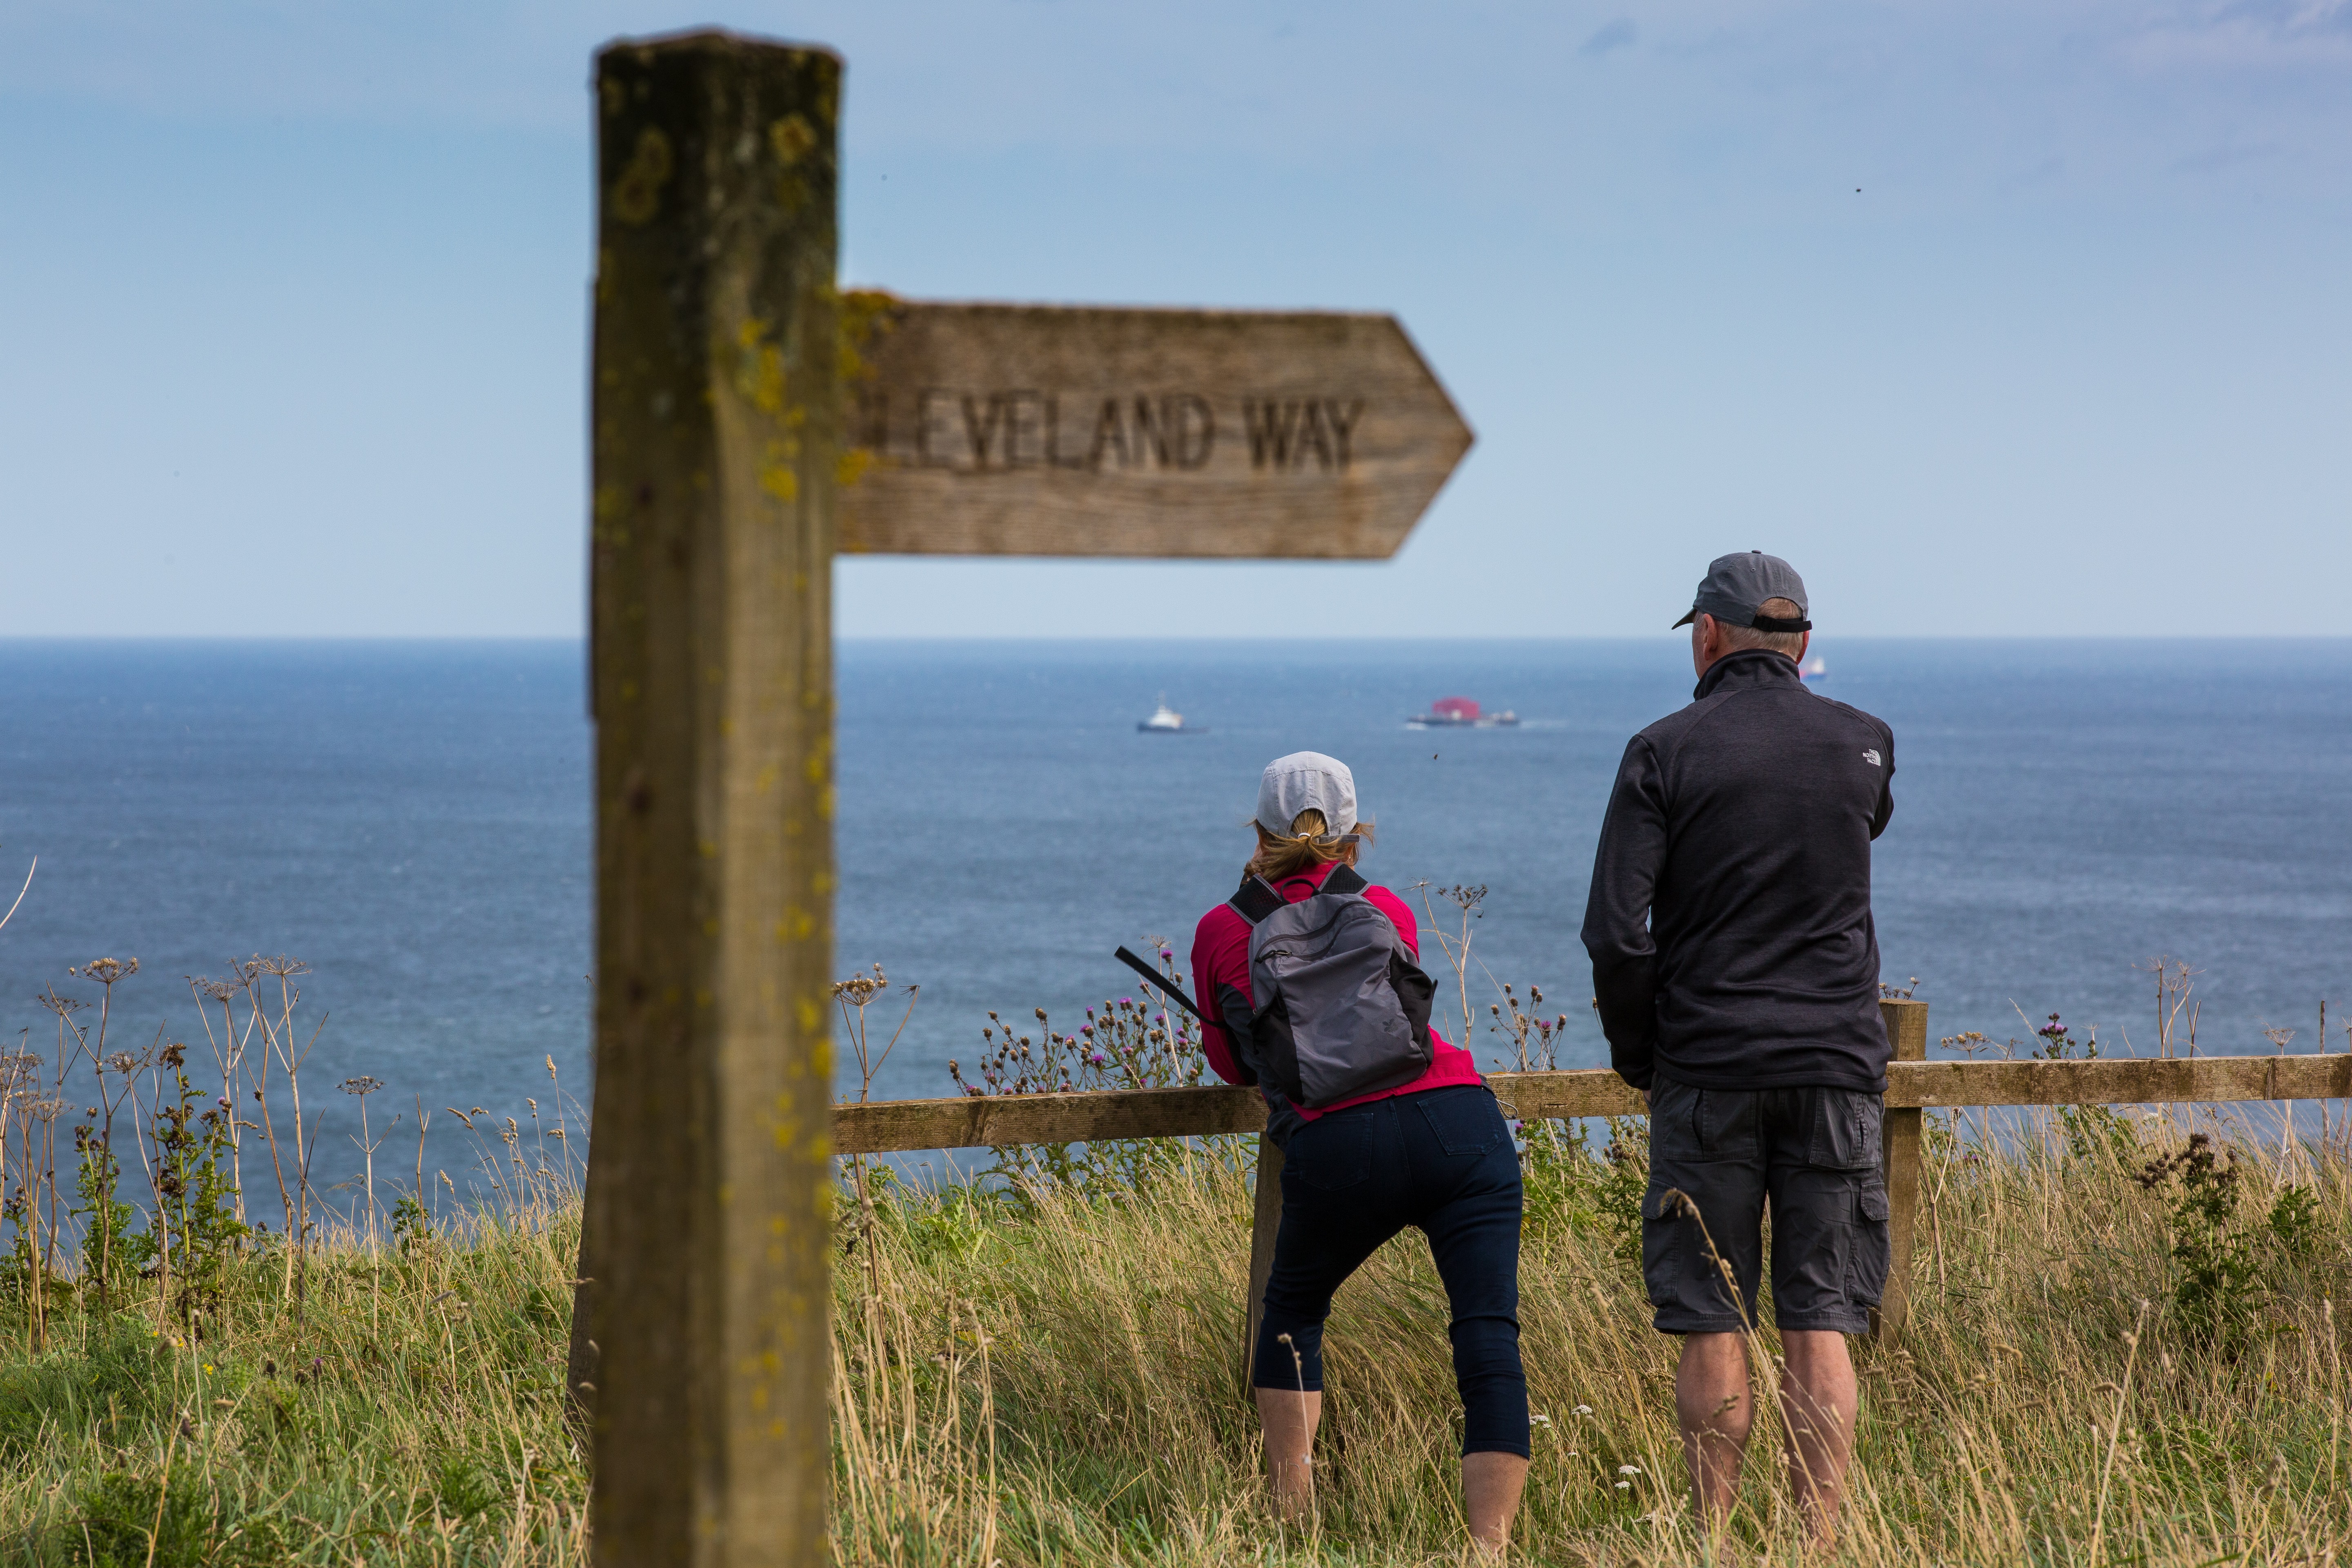 Couple leaning over fence looking out to sea with Cleveland Way signpost